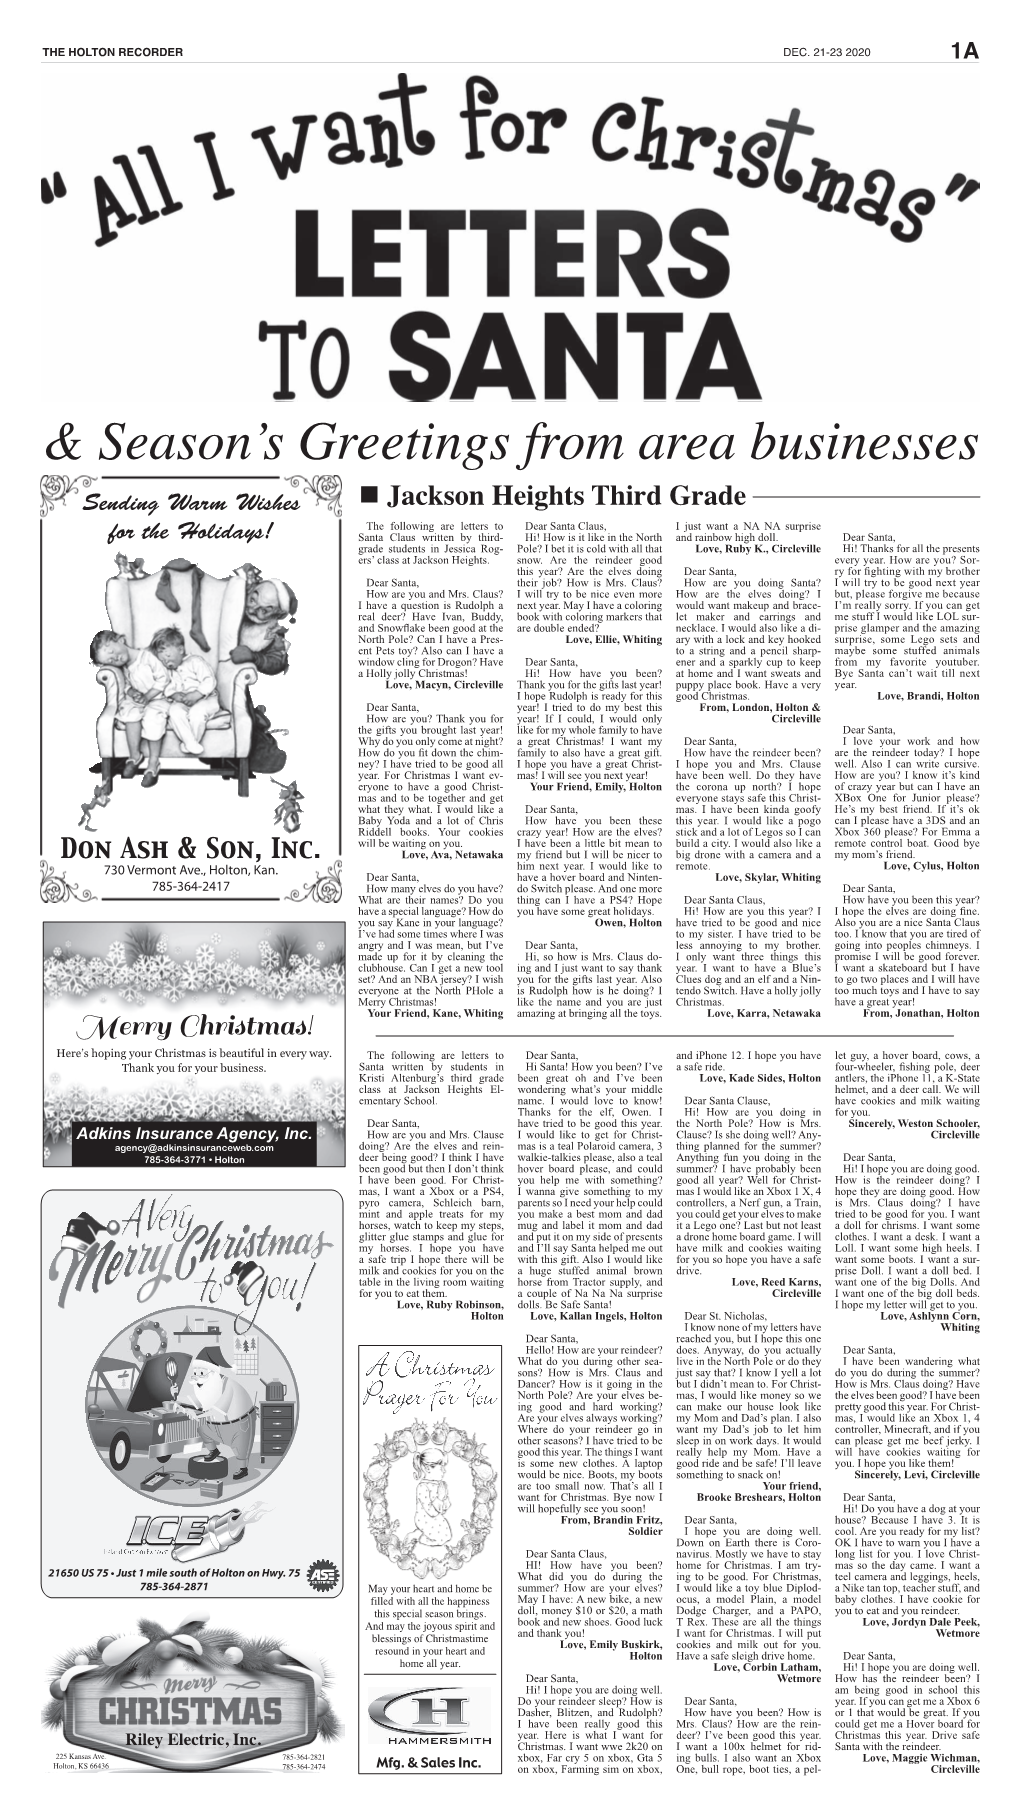 & Season's Greetings from Area Businesses